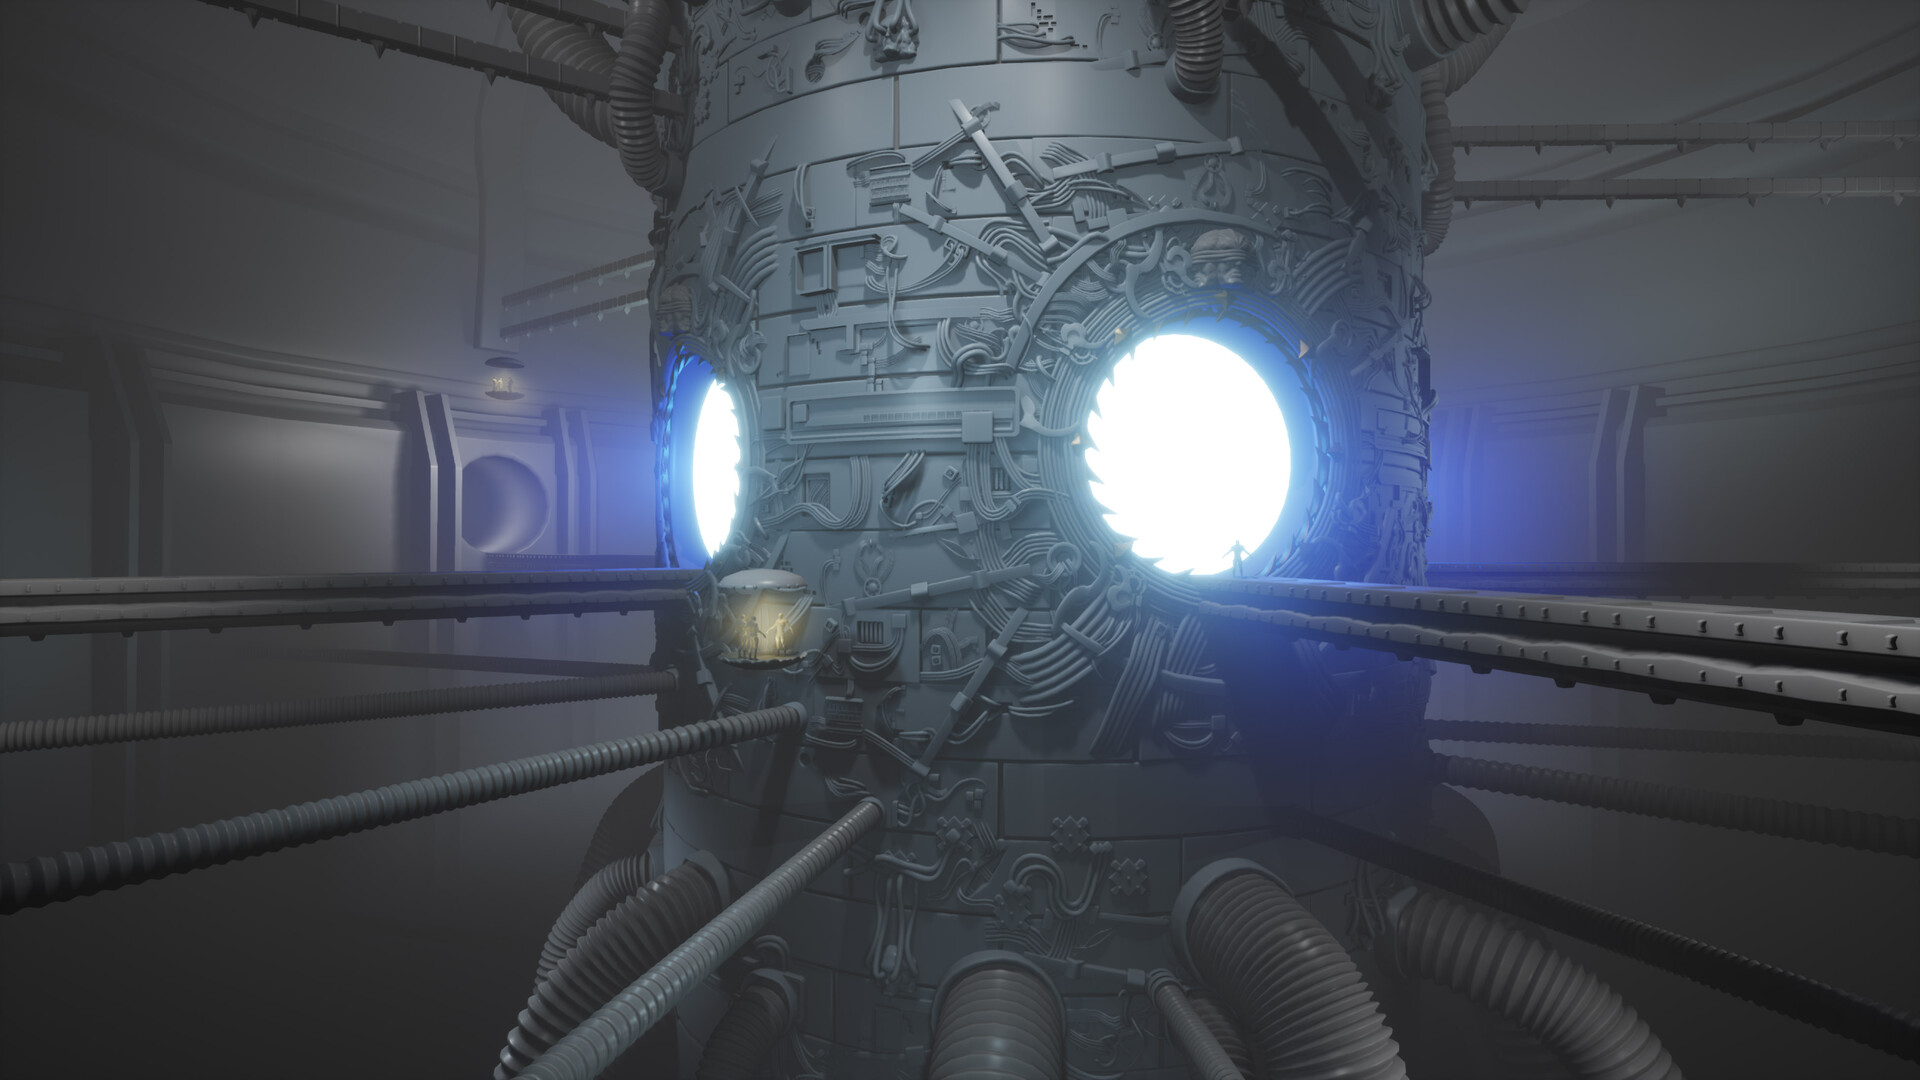 Main camera angle from Unreal 4. Compared to the last blog post, now the greeble panels are much more populated with little details. The portal has a sharp fang-like aperture around it.